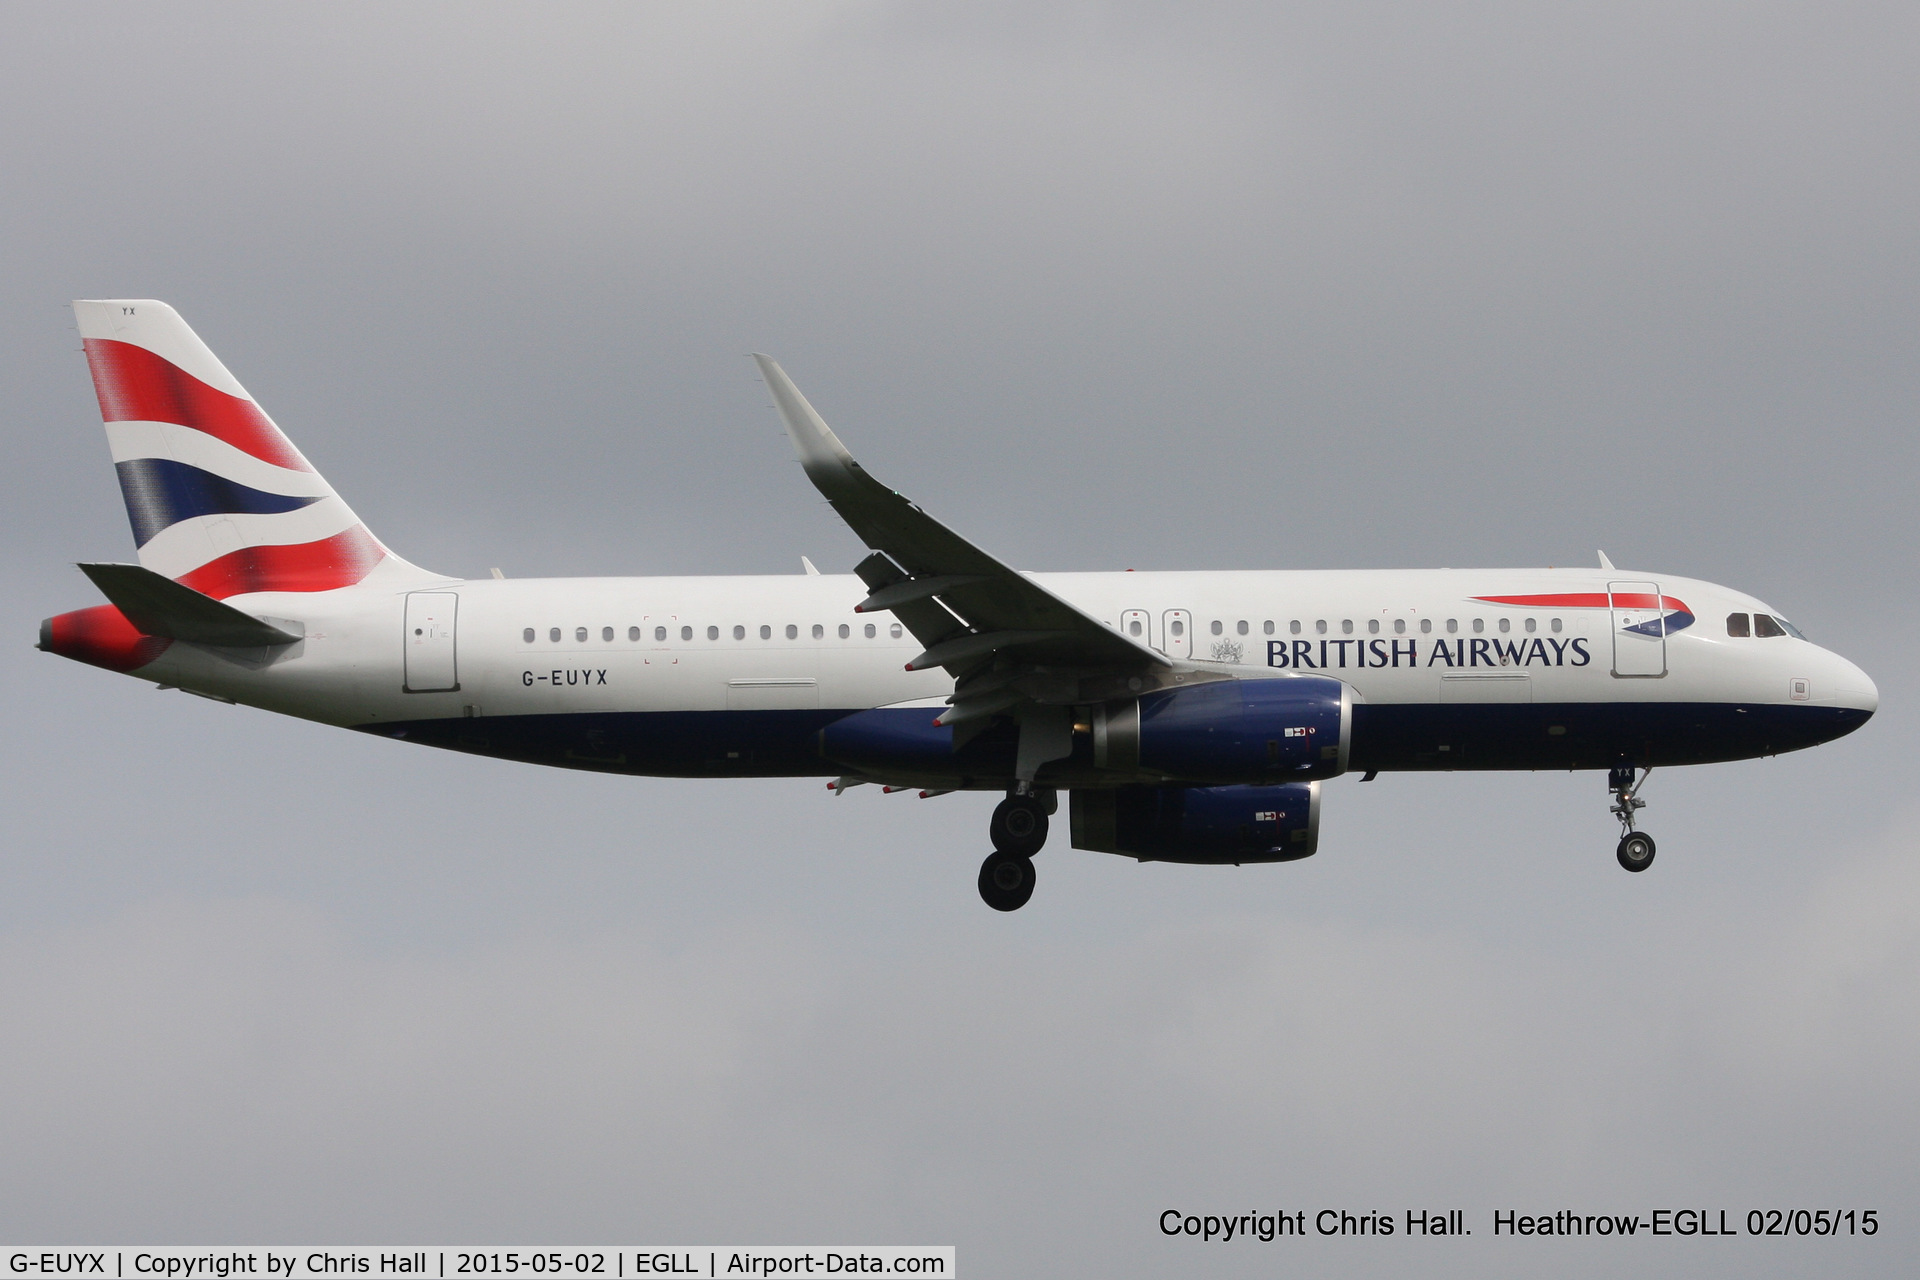 G-EUYX, 2014 Airbus A320-232 C/N 6155, now with Sharklets